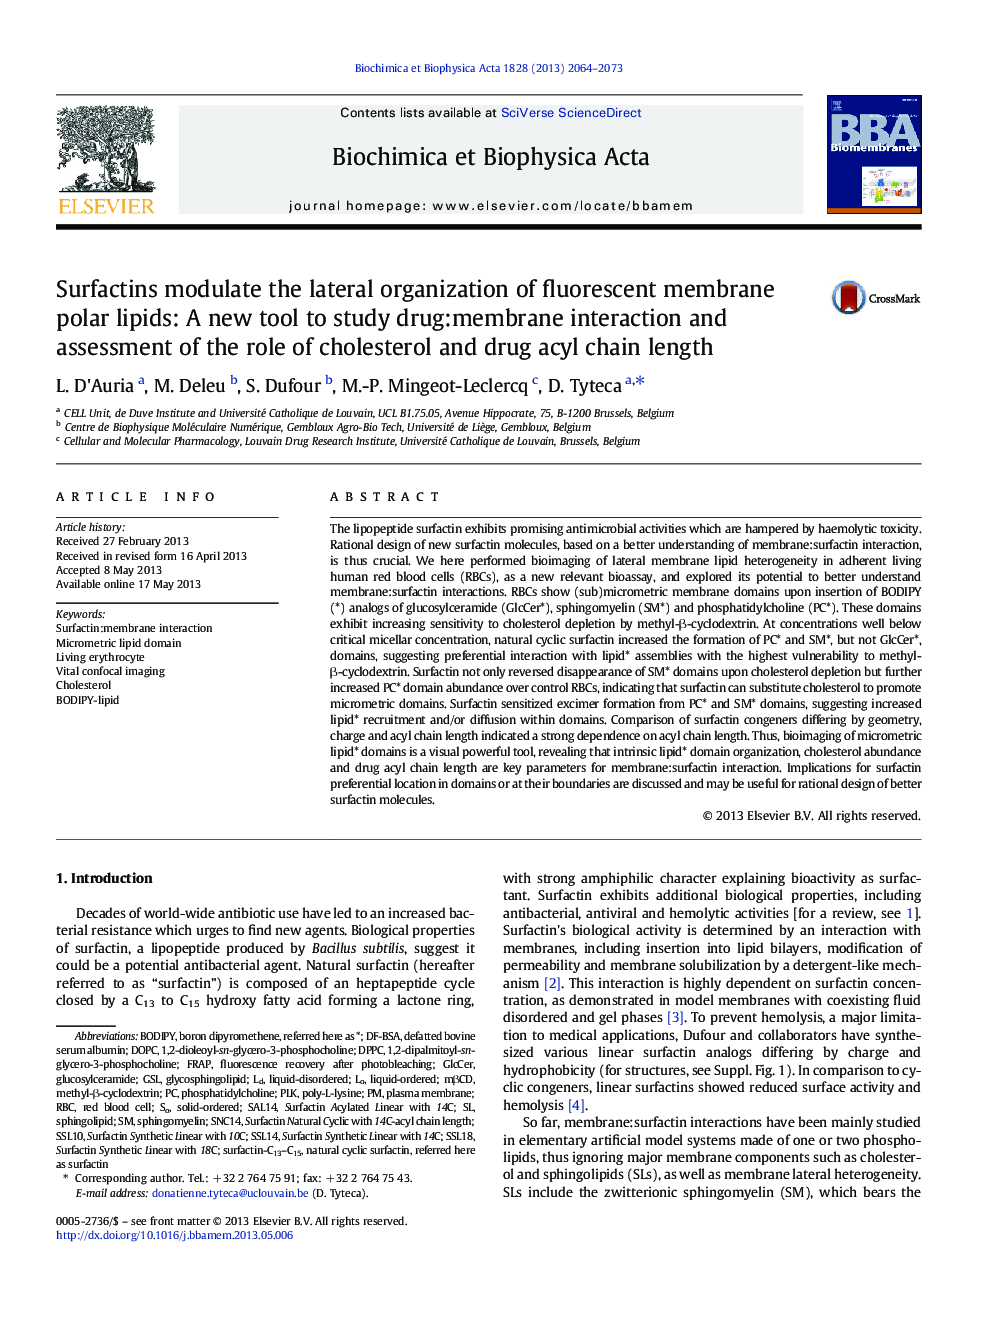 Surfactins modulate the lateral organization of fluorescent membrane polar lipids: A new tool to study drug:membrane interaction and assessment of the role of cholesterol and drug acyl chain length